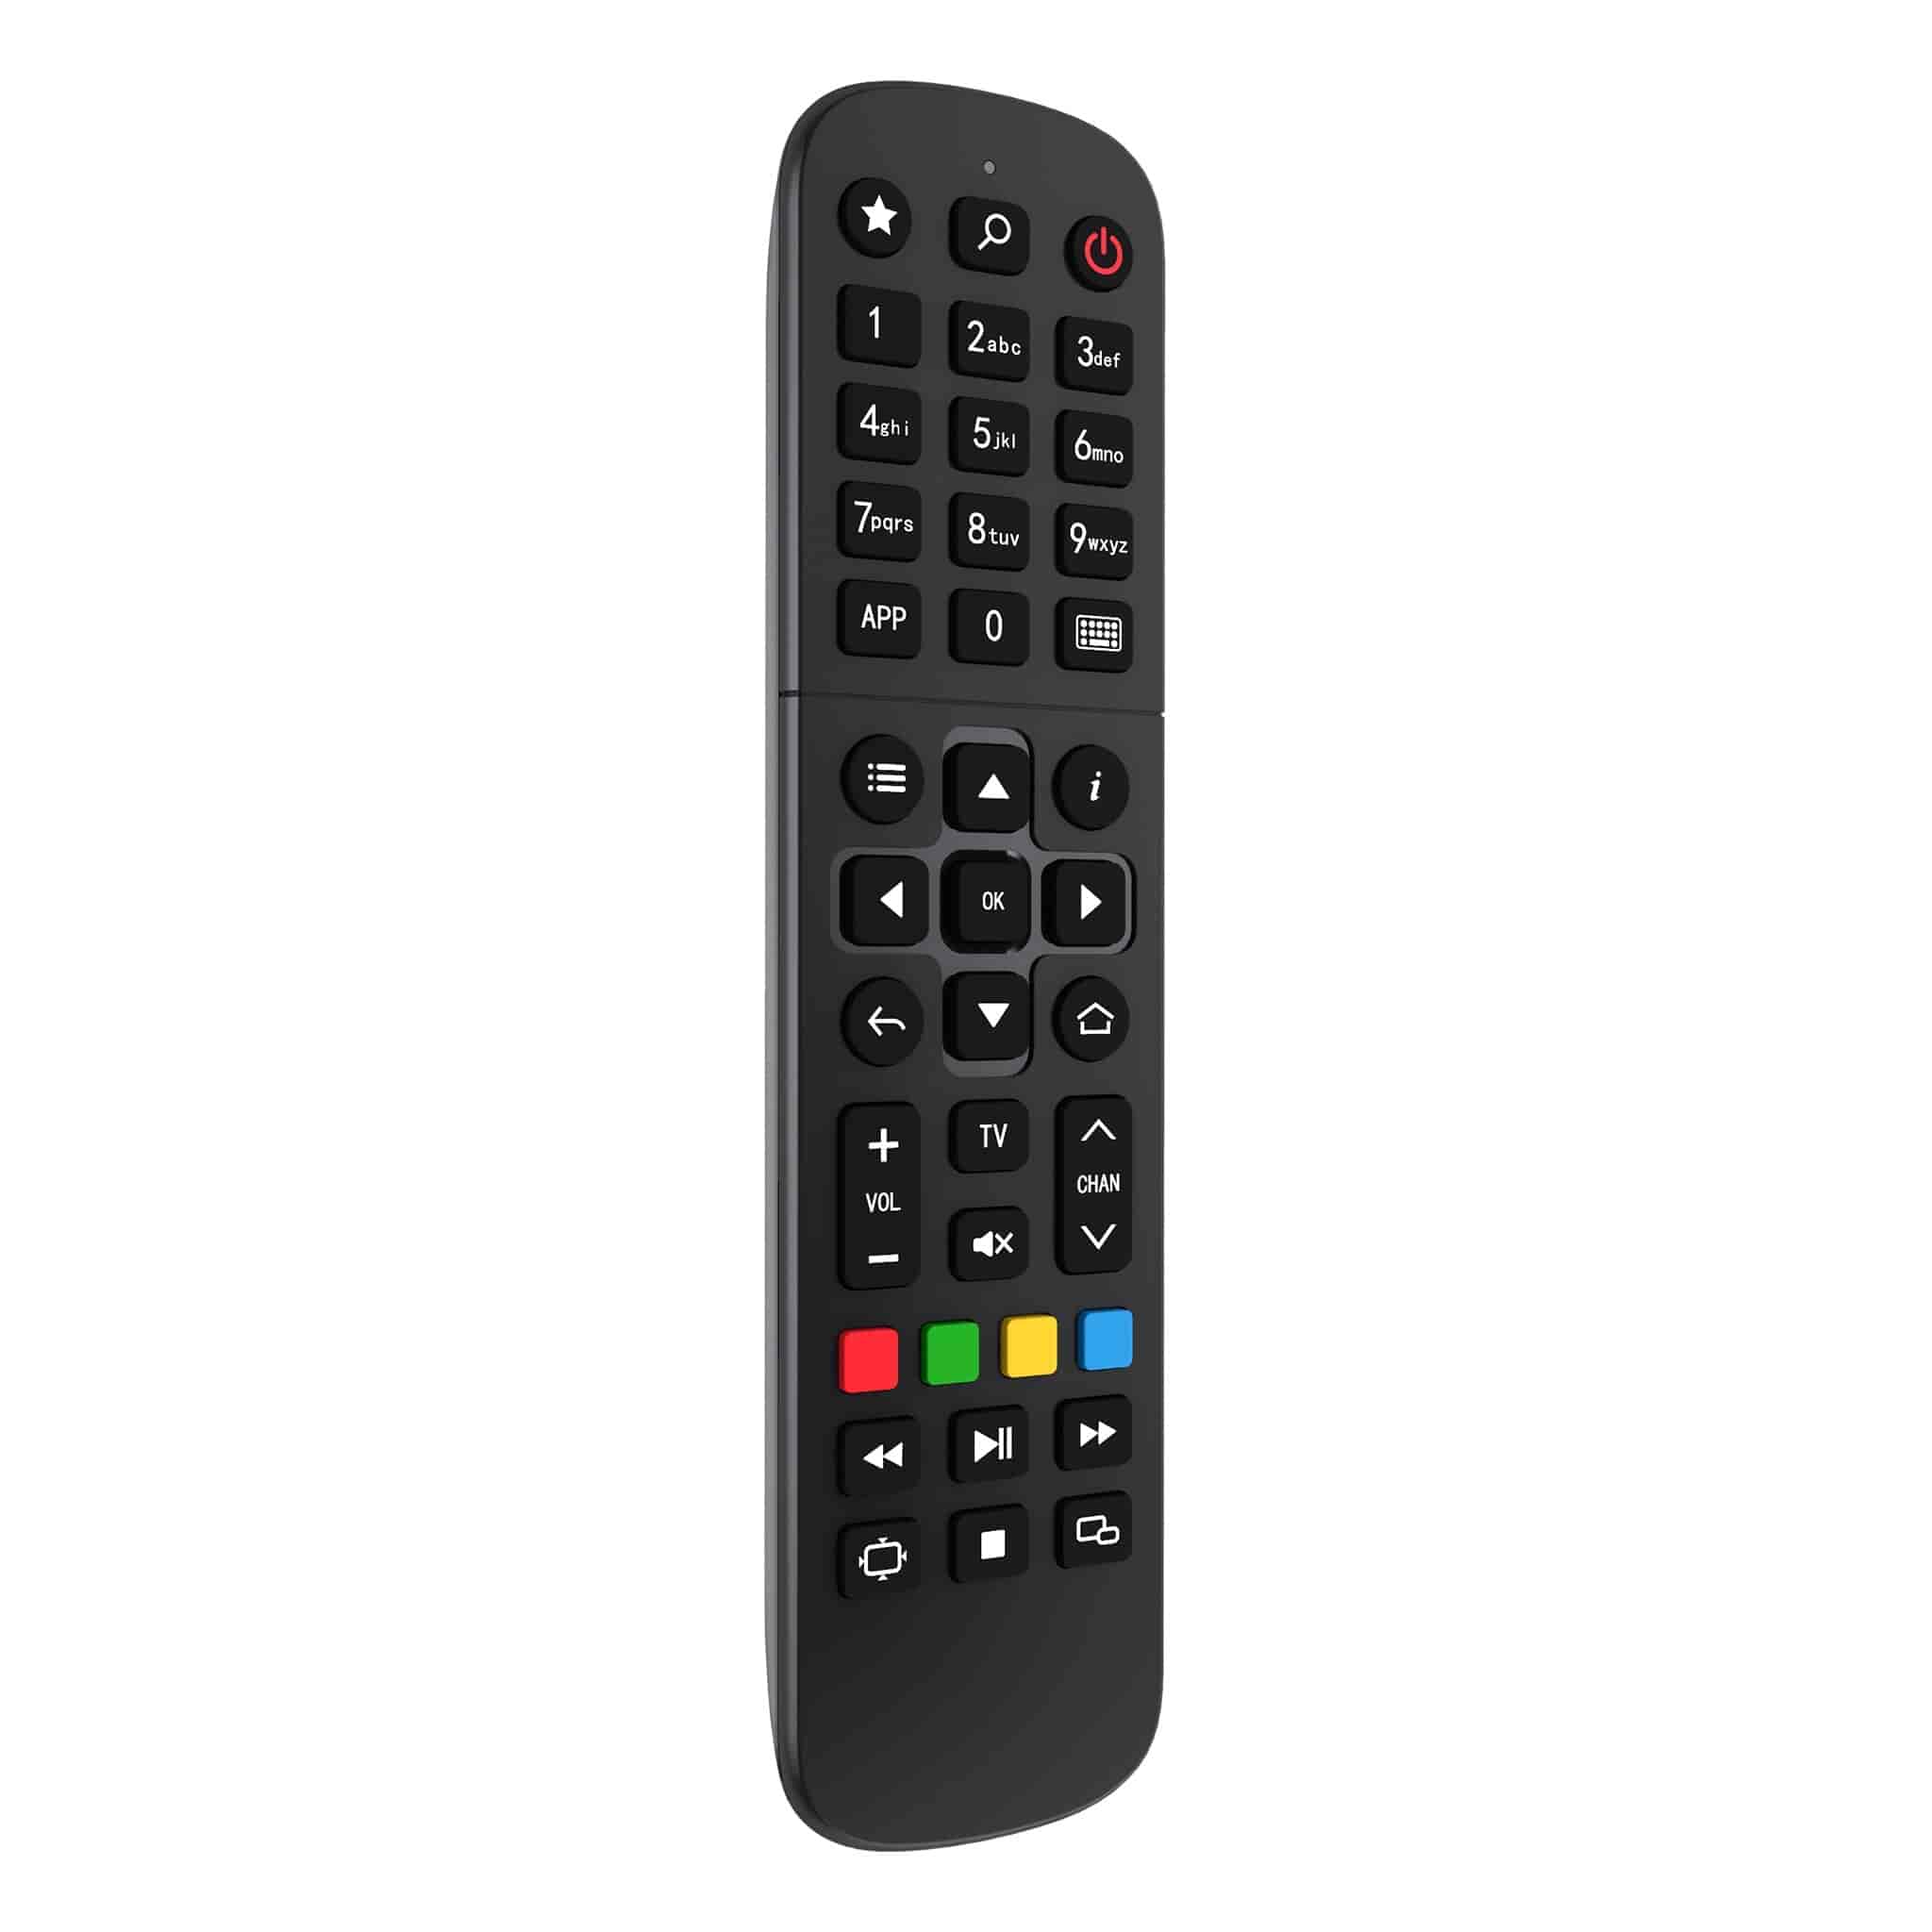 MAG520 IP TV Internet Streamer HEVC H.265 4K UHD 60FPS Linux USB 3.0 LAN HDMIMAG 520 is a powerful and cost-effective solution for fast access to IPTV / OTT projects. The set-top box is equipped with an ARM Cortex-A53 processor with the Amlogic S905X2 chipset as well as with a built-in HEVC codec so that 4K quality videos can be viewed at 60 FPS without overloading the network or chopping. MAG520 is Linux-based and among the latest products from MAG. The MAG 520 IP TV box offers pure surround sound thanks to the integrated eight-channel Dolby Digital Plus sound system. MAG520 plays from a variety of media sources including PC and NAS in a local area network, Stream Media Protocols (RTSP, RTP, UDP, HTTP), via USB. Note: MAG 520 is not pre-programmed and does not contain IPTV channels. You thus have a free choice to choose your own IPTV provider. Infomir